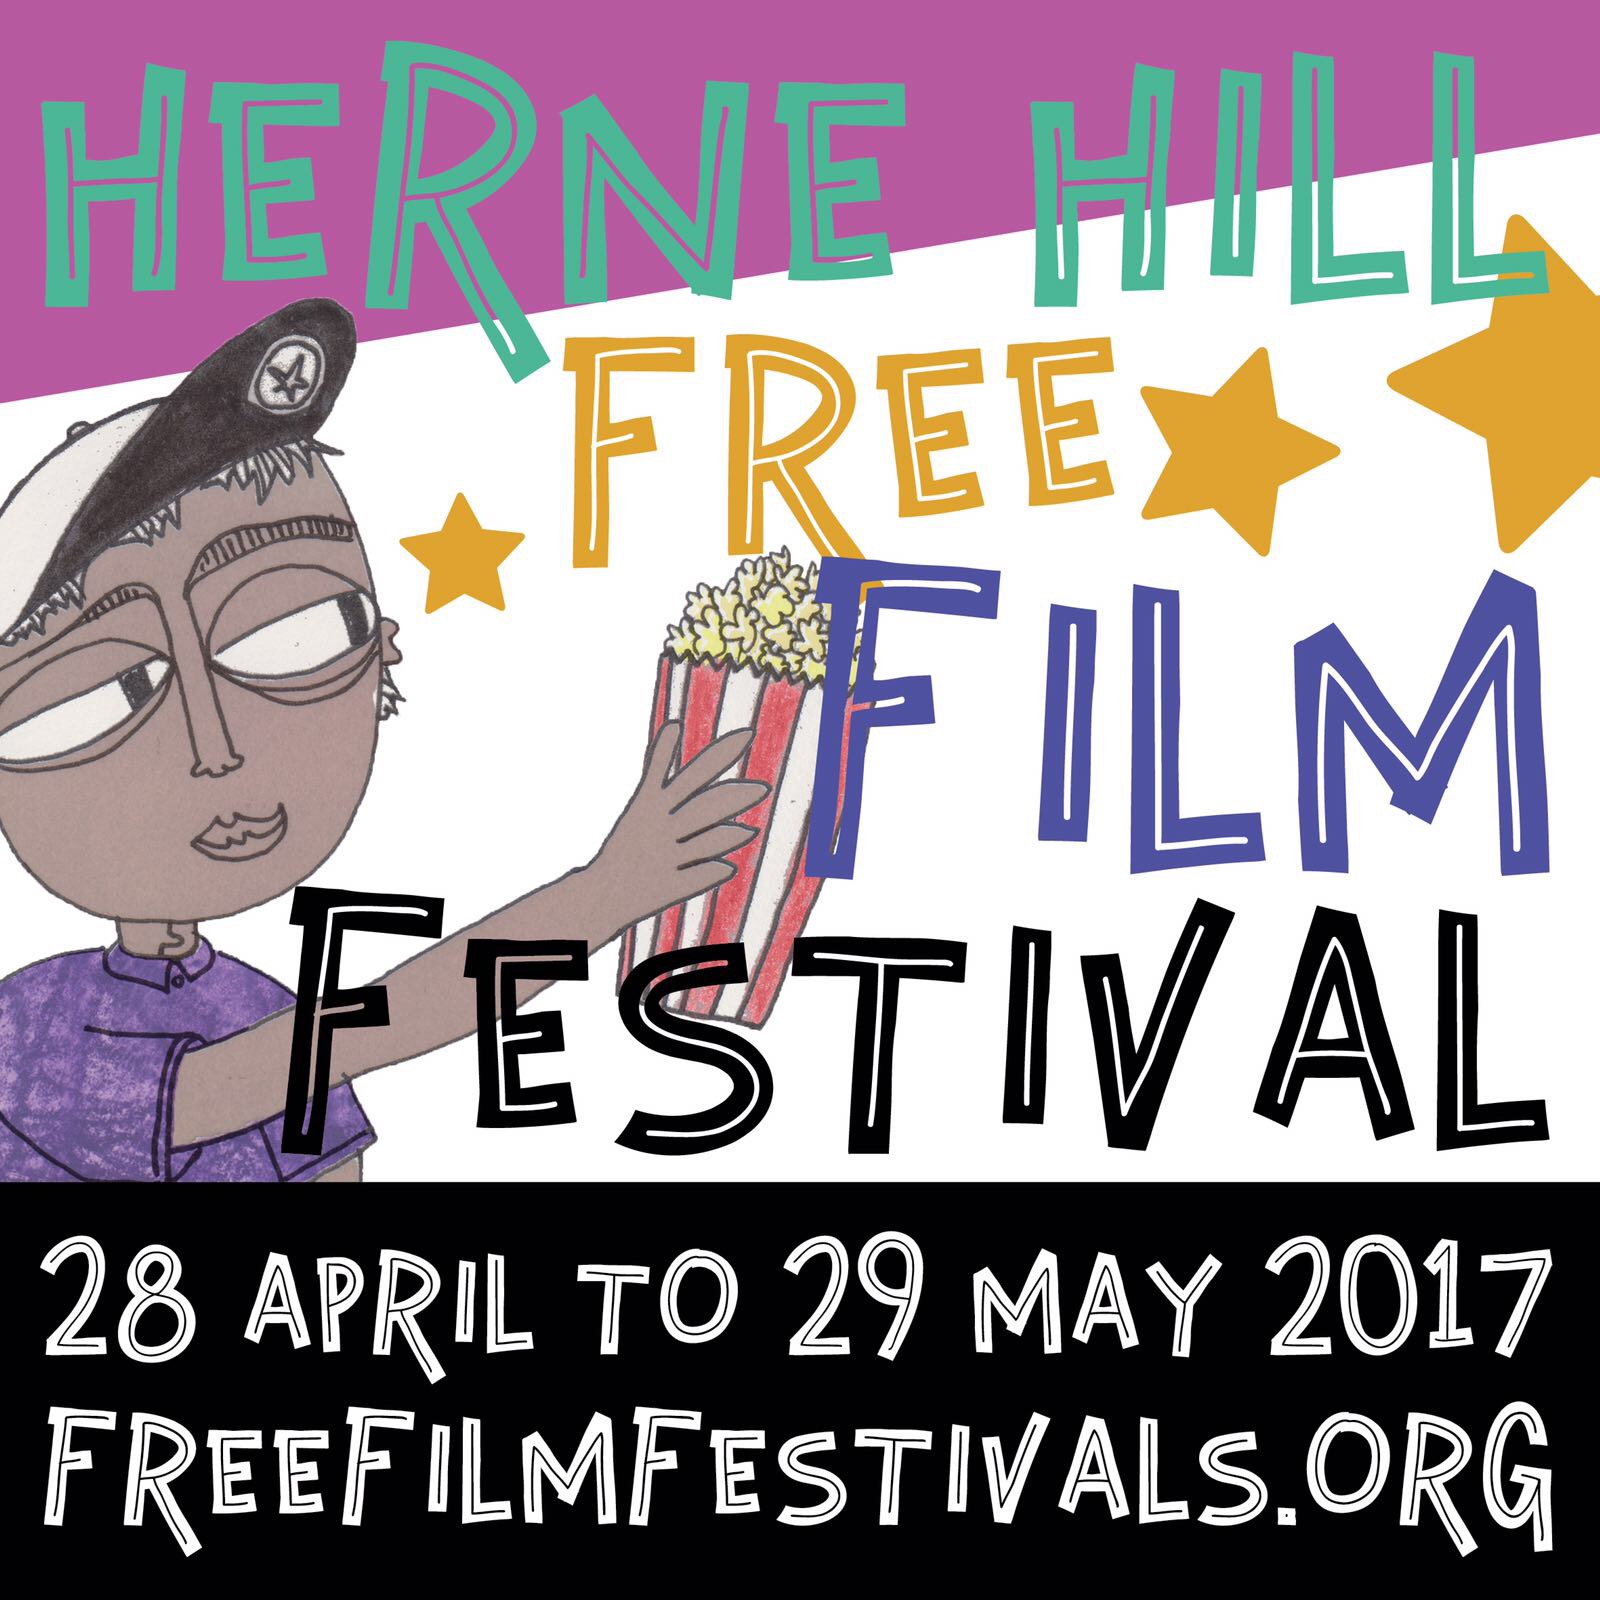 The Herne Hill Free Film Festival Celebrates Its 5th Birthday